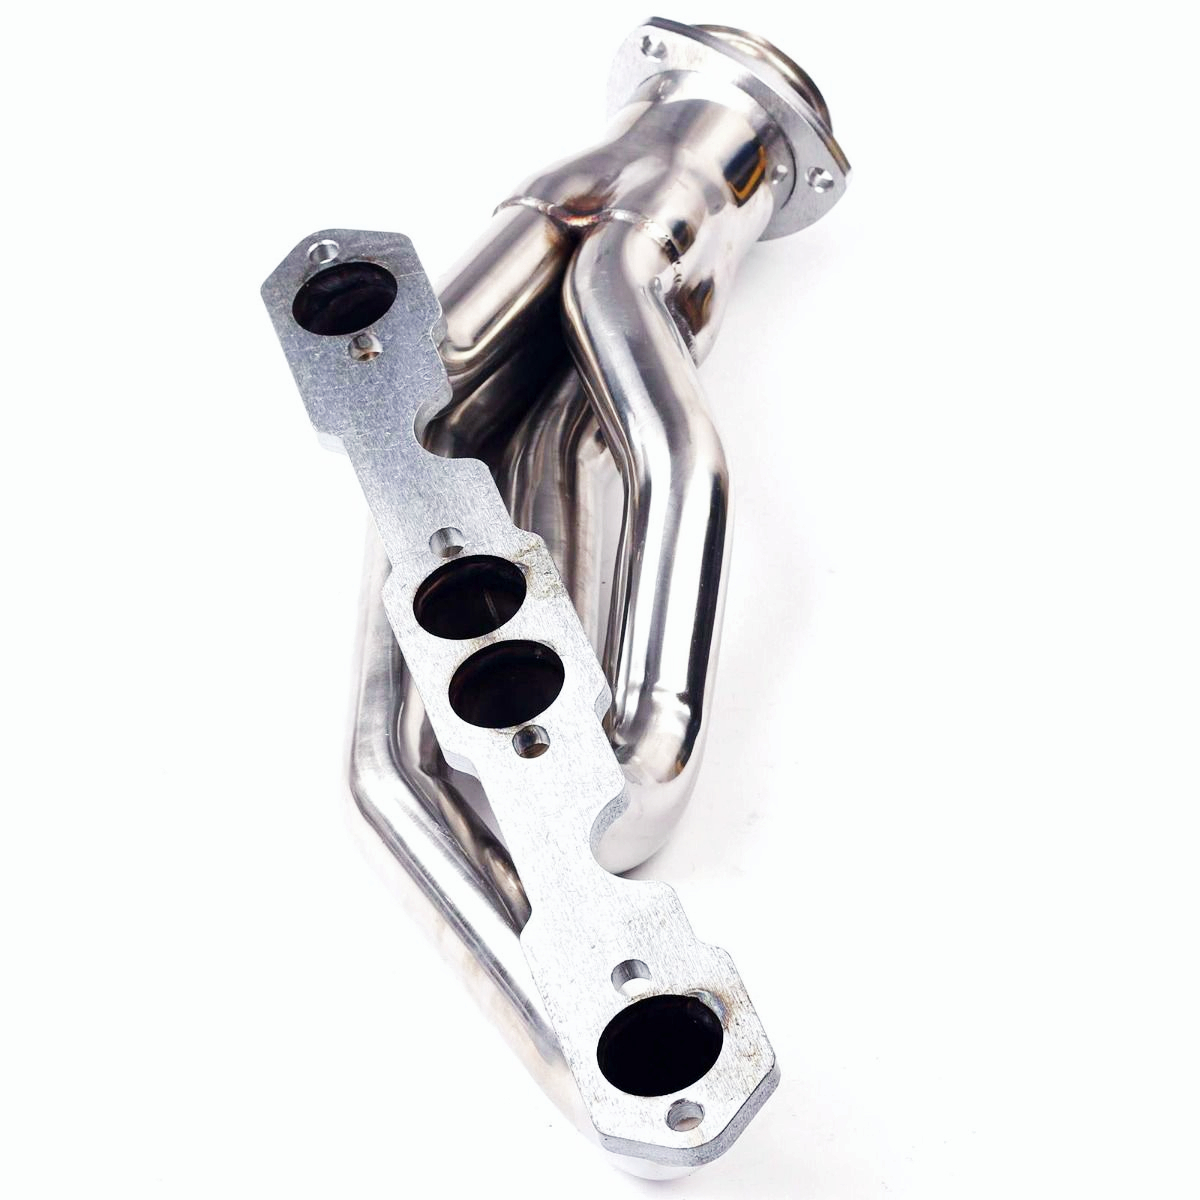 304 Stainless steel exhaust headers for NEW Chevy 88-95 Truck 305 350 5.7L GMC